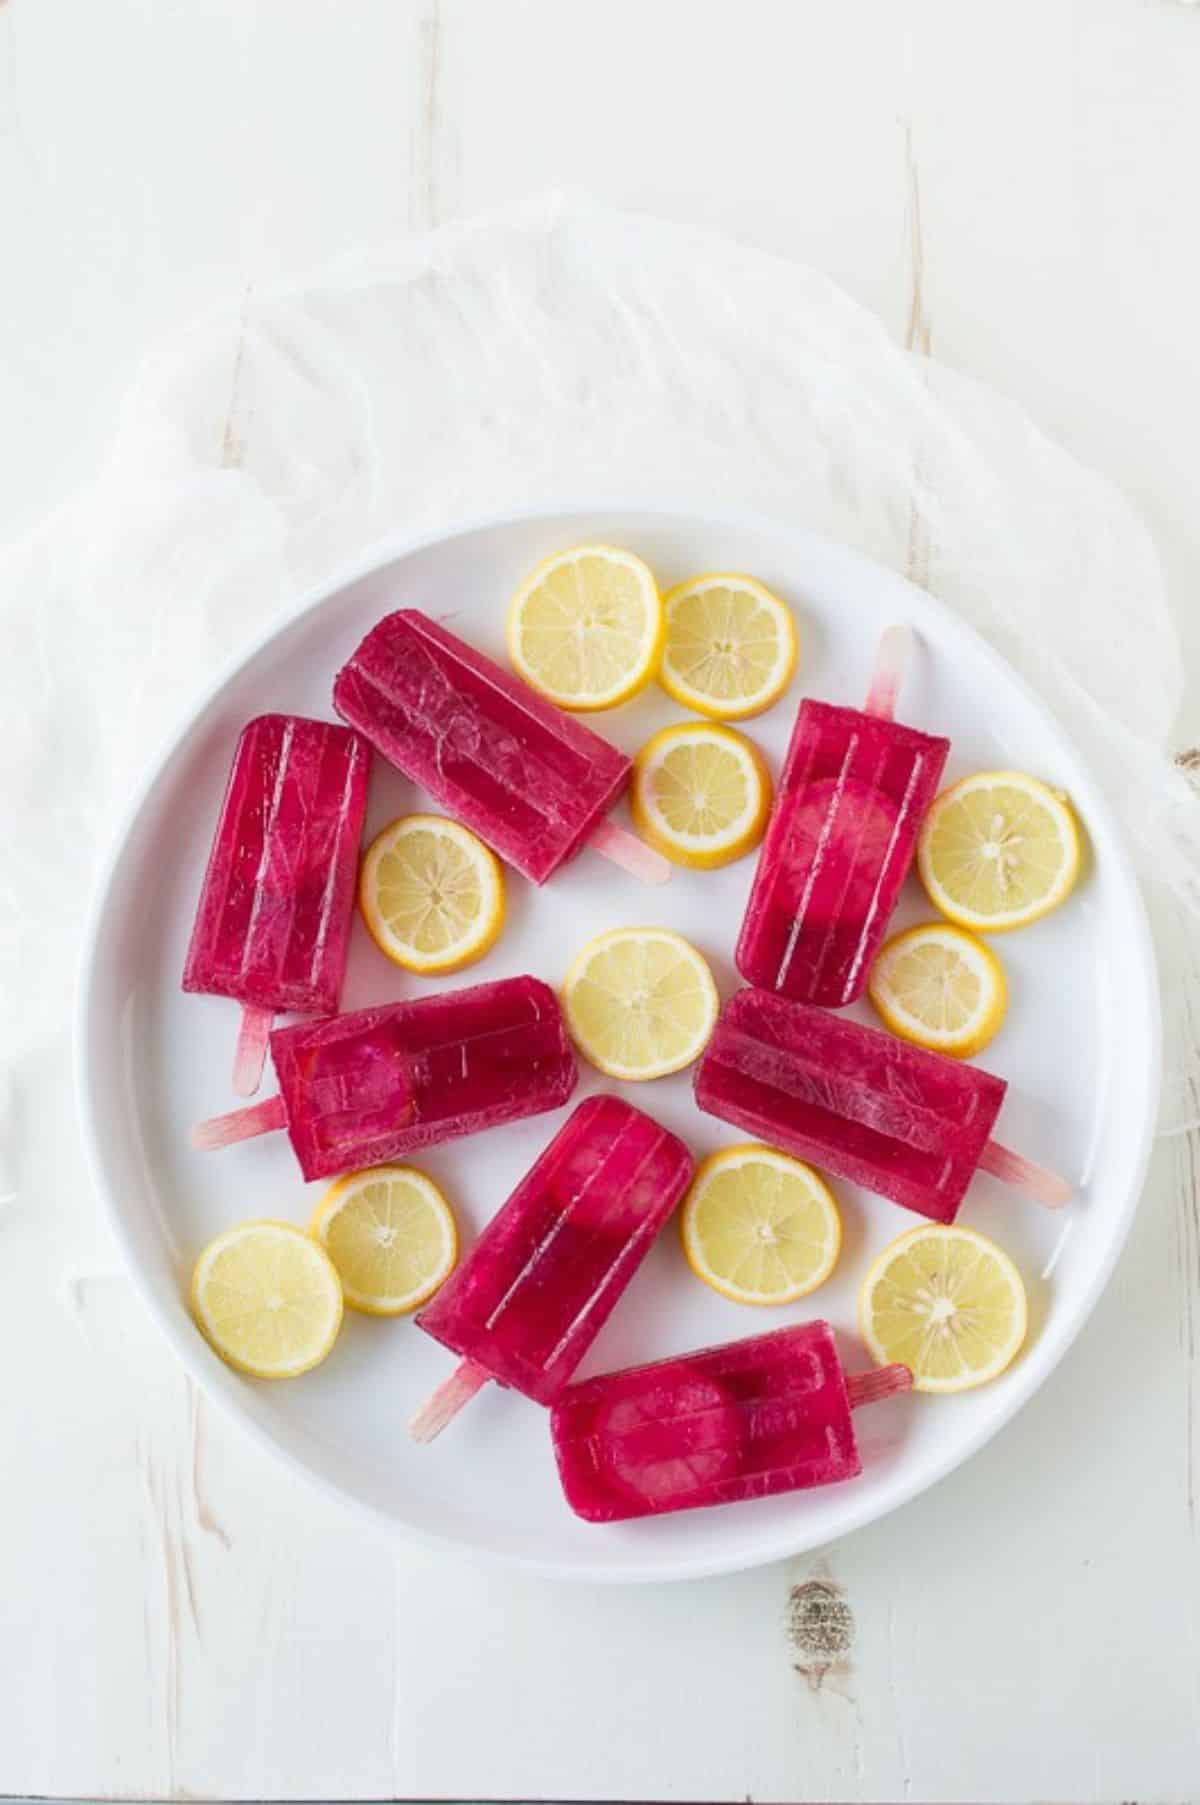 Fresh passion lemonade popsicles with lemon slices on a white tray.